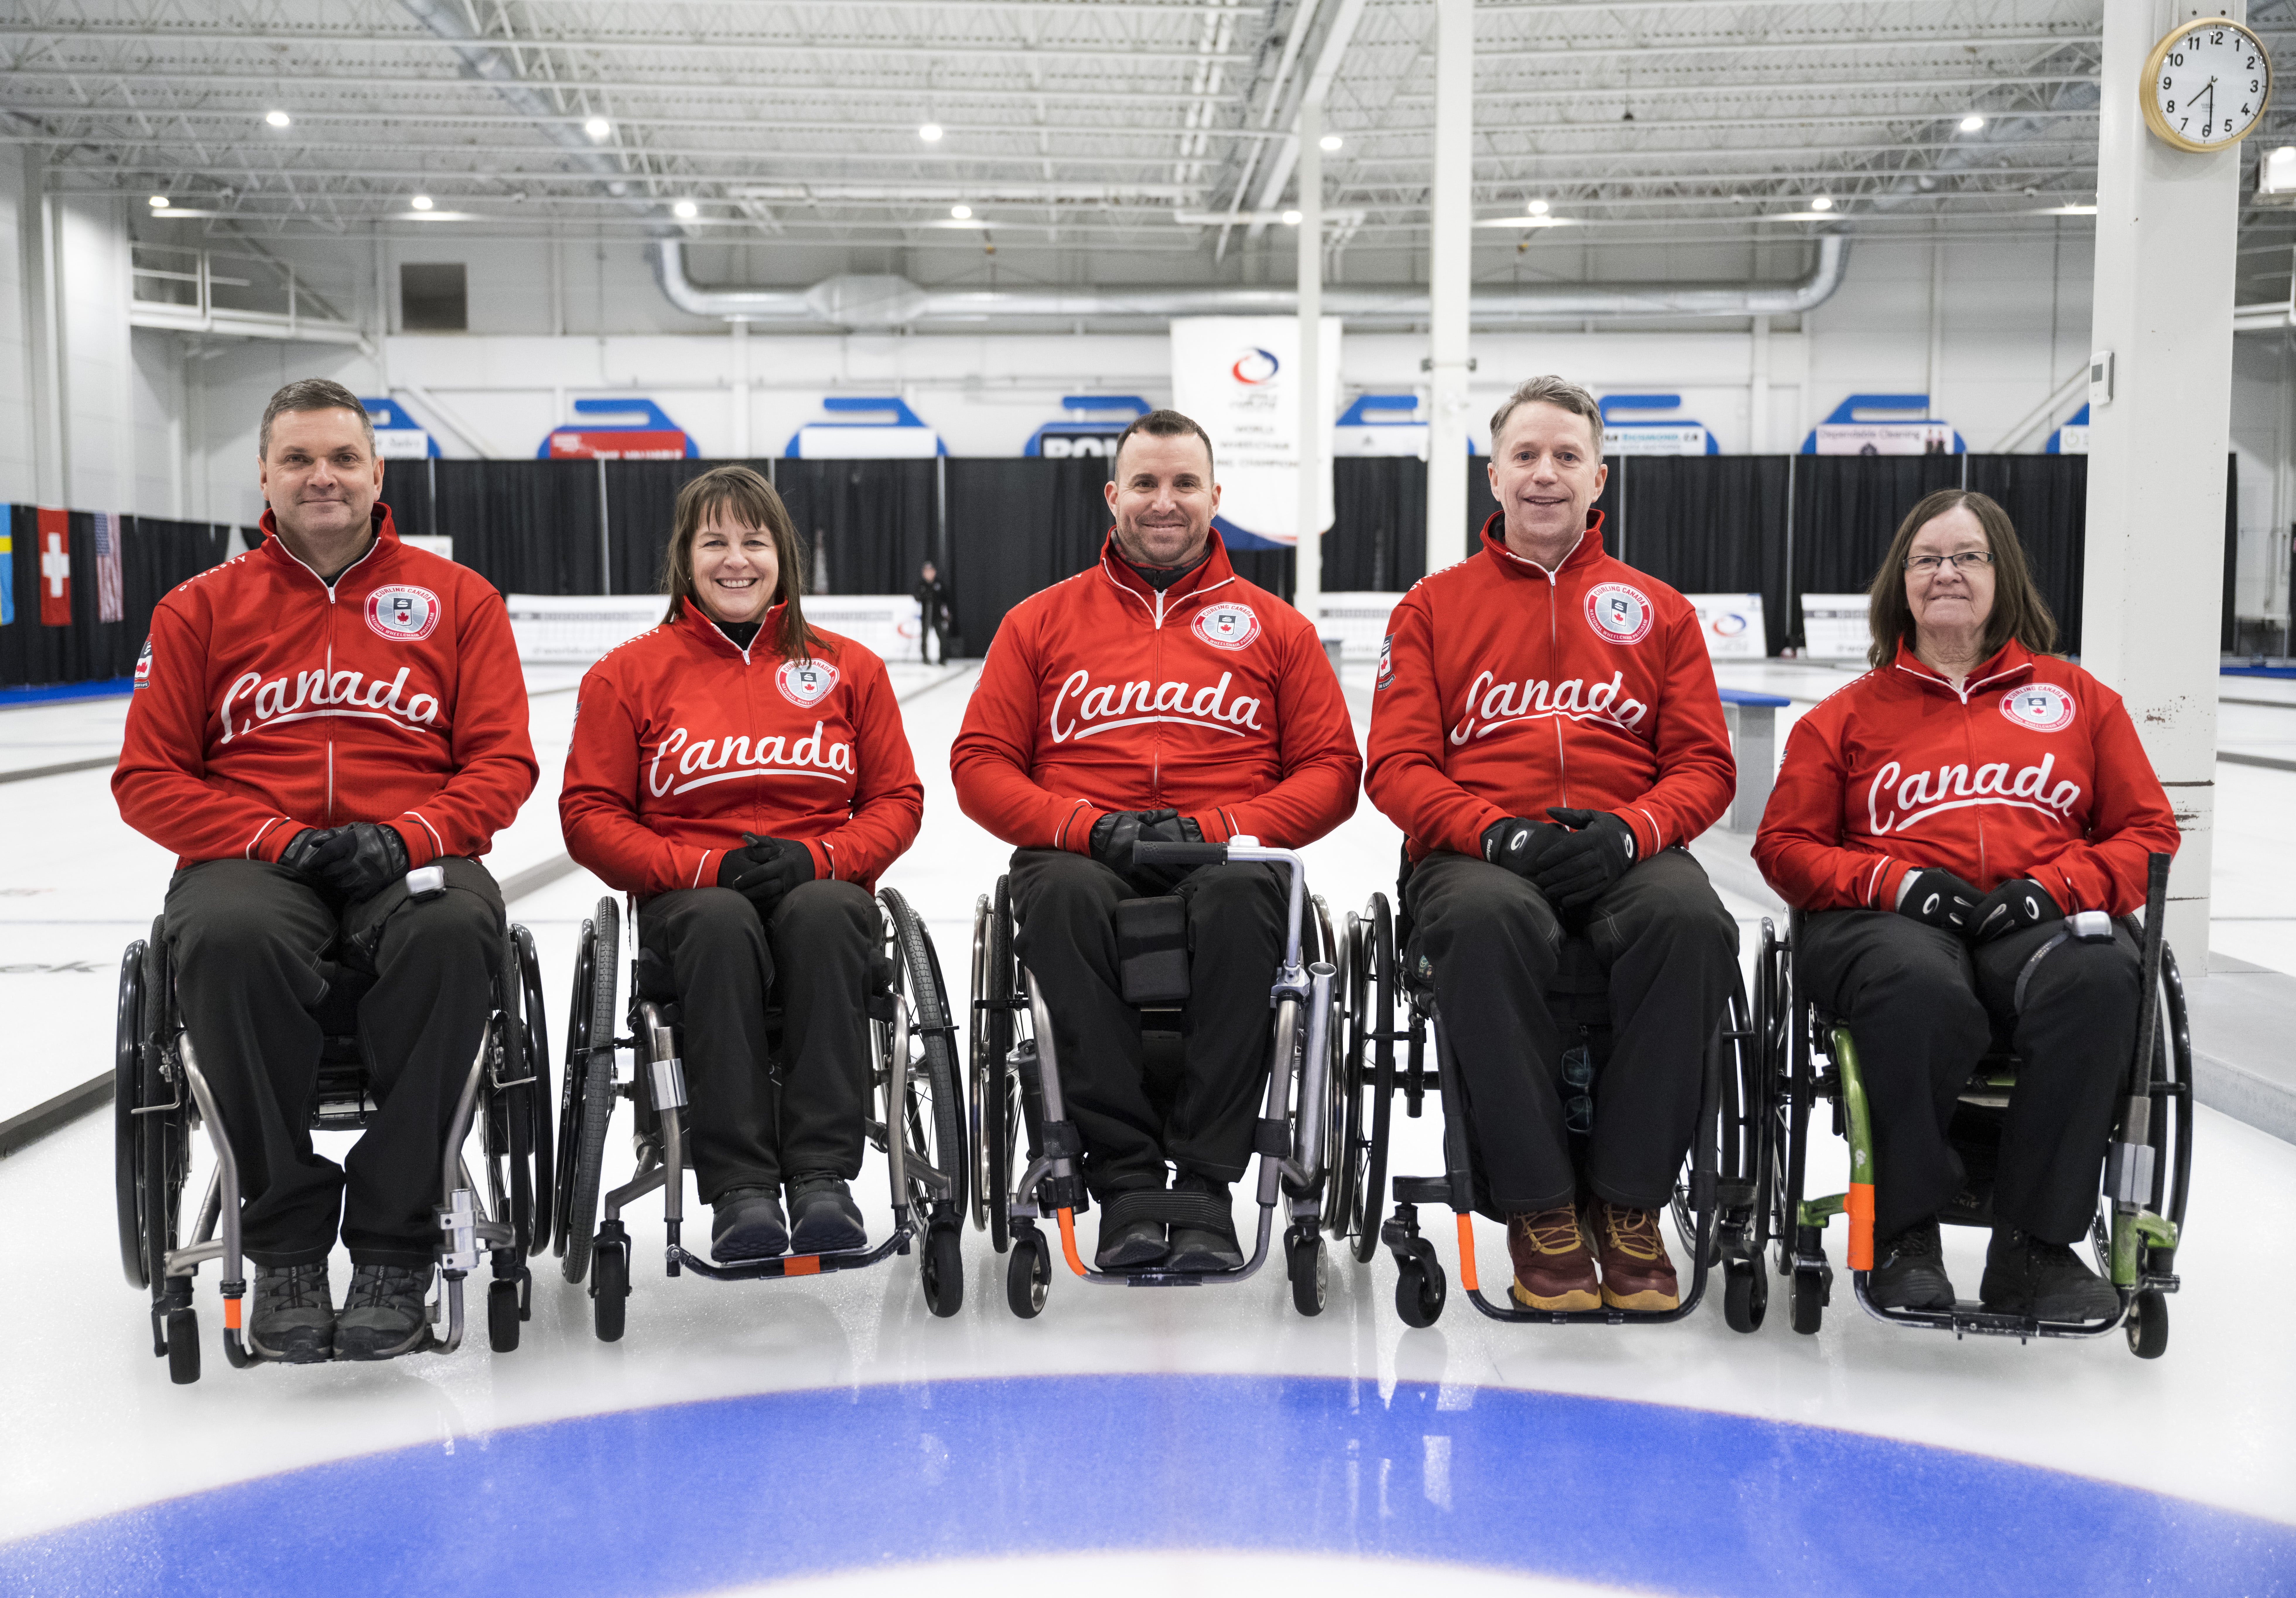 Curling Canada Back to winning ways!